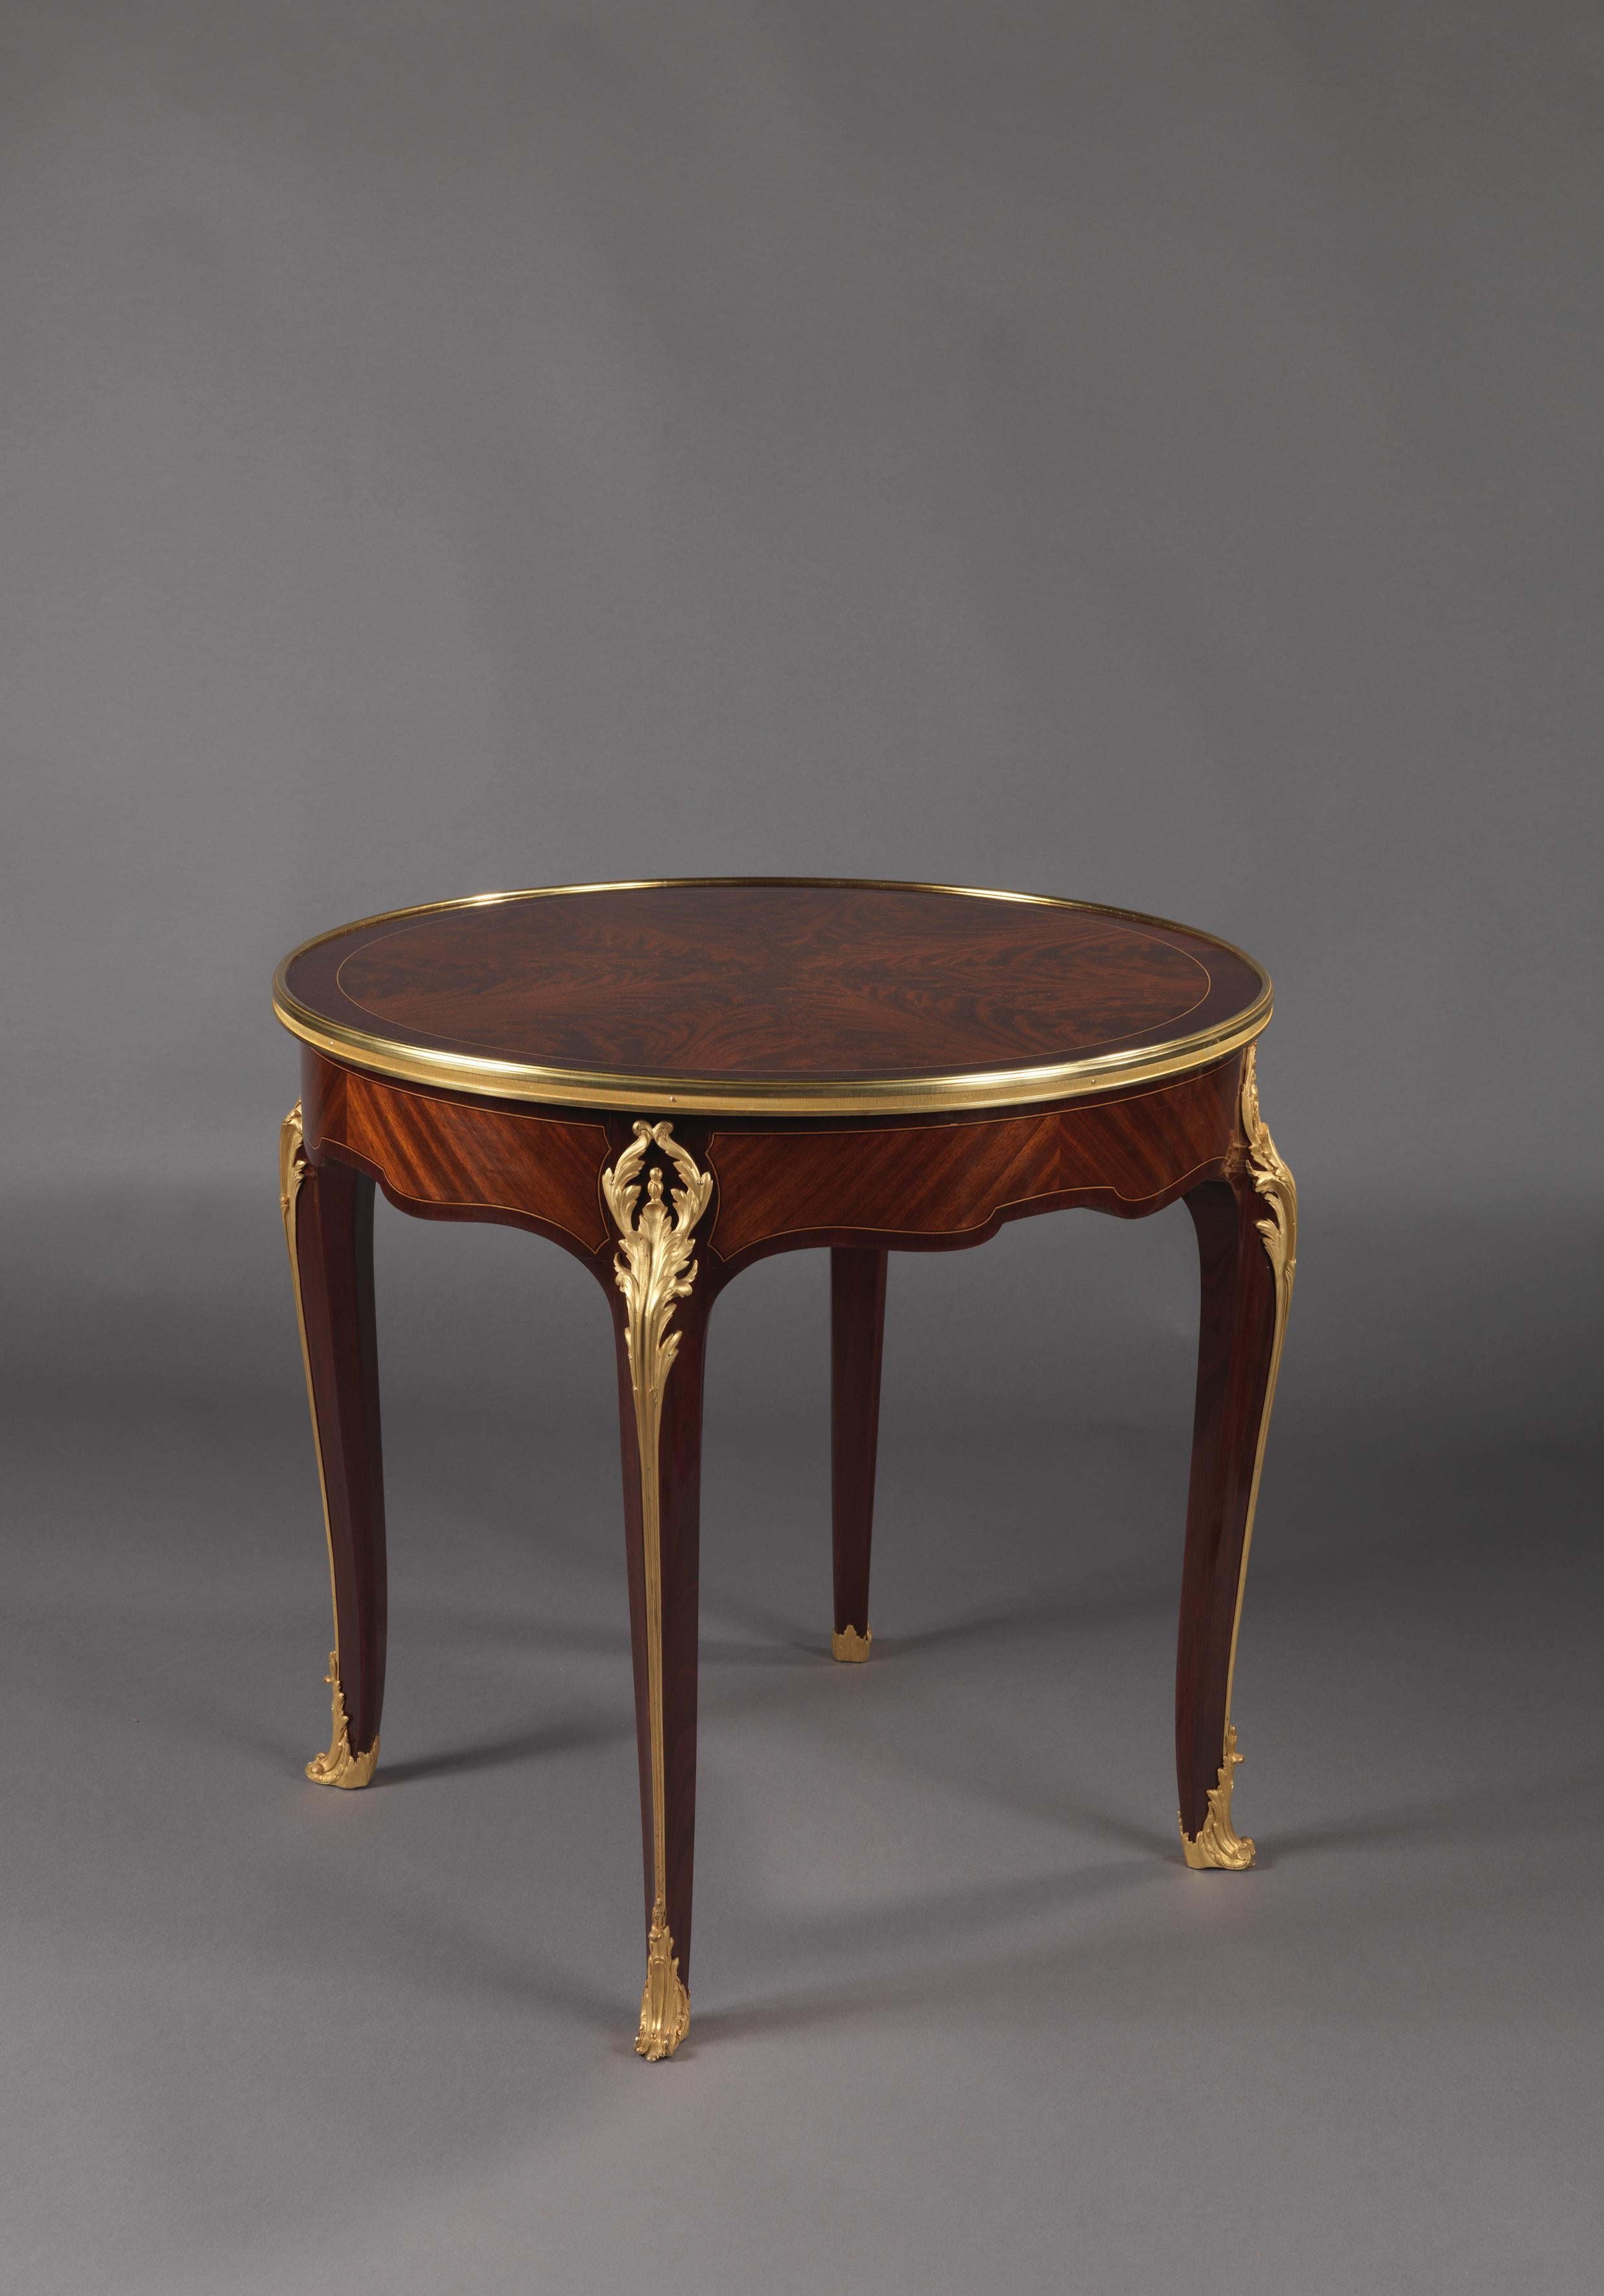 A fine gilt-bronze mounted flame mahogany and Satine Gueridon with a reversible baise lined top.

French, circa 1890. 

This fine gueridon has a circular top veneered in flame mahogany, the reverse with a green baise playing surface. The table